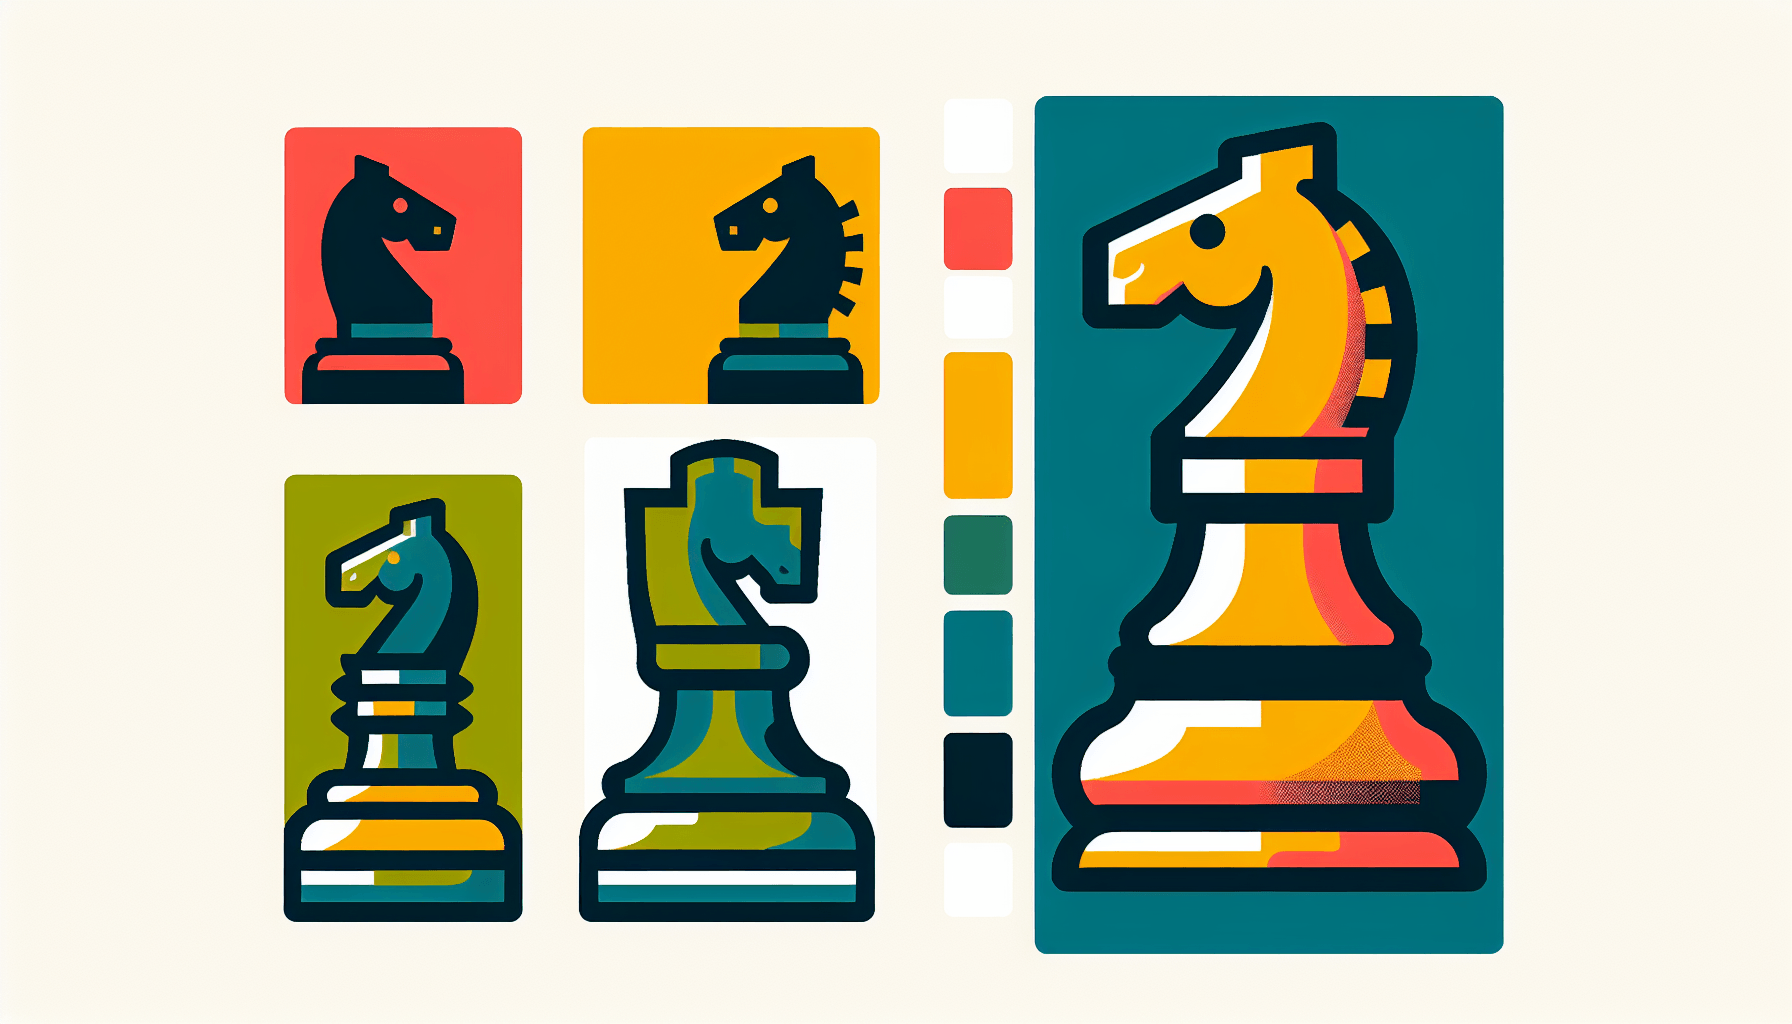 Chess piece in flat illustration style and white background, red #f47574, green #88c7a8, yellow #fcc44b, and blue #645bc8 colors.